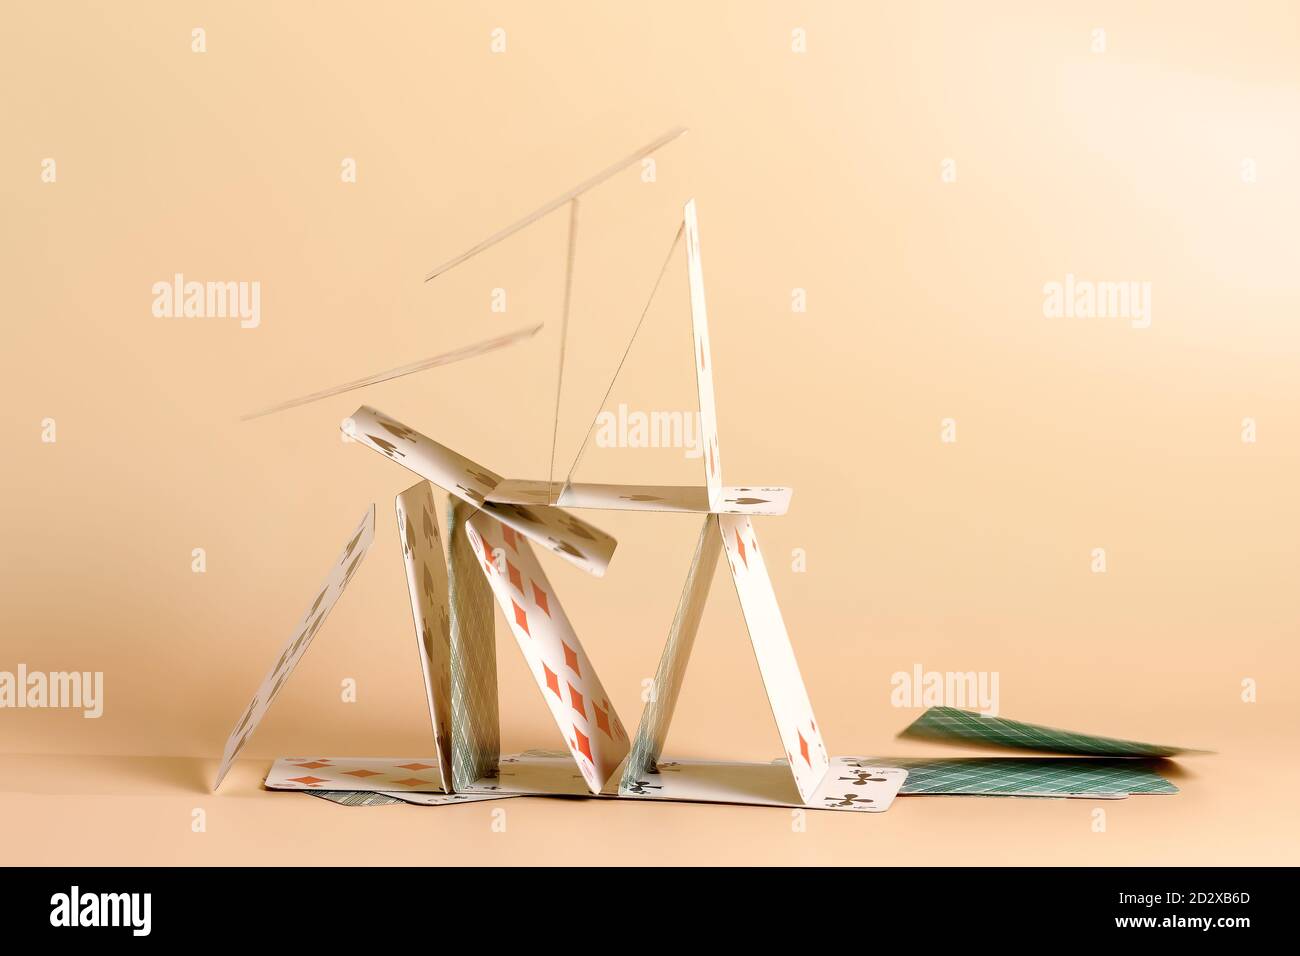 Crashed house of cards. Falling cards on beige background Stock Photo